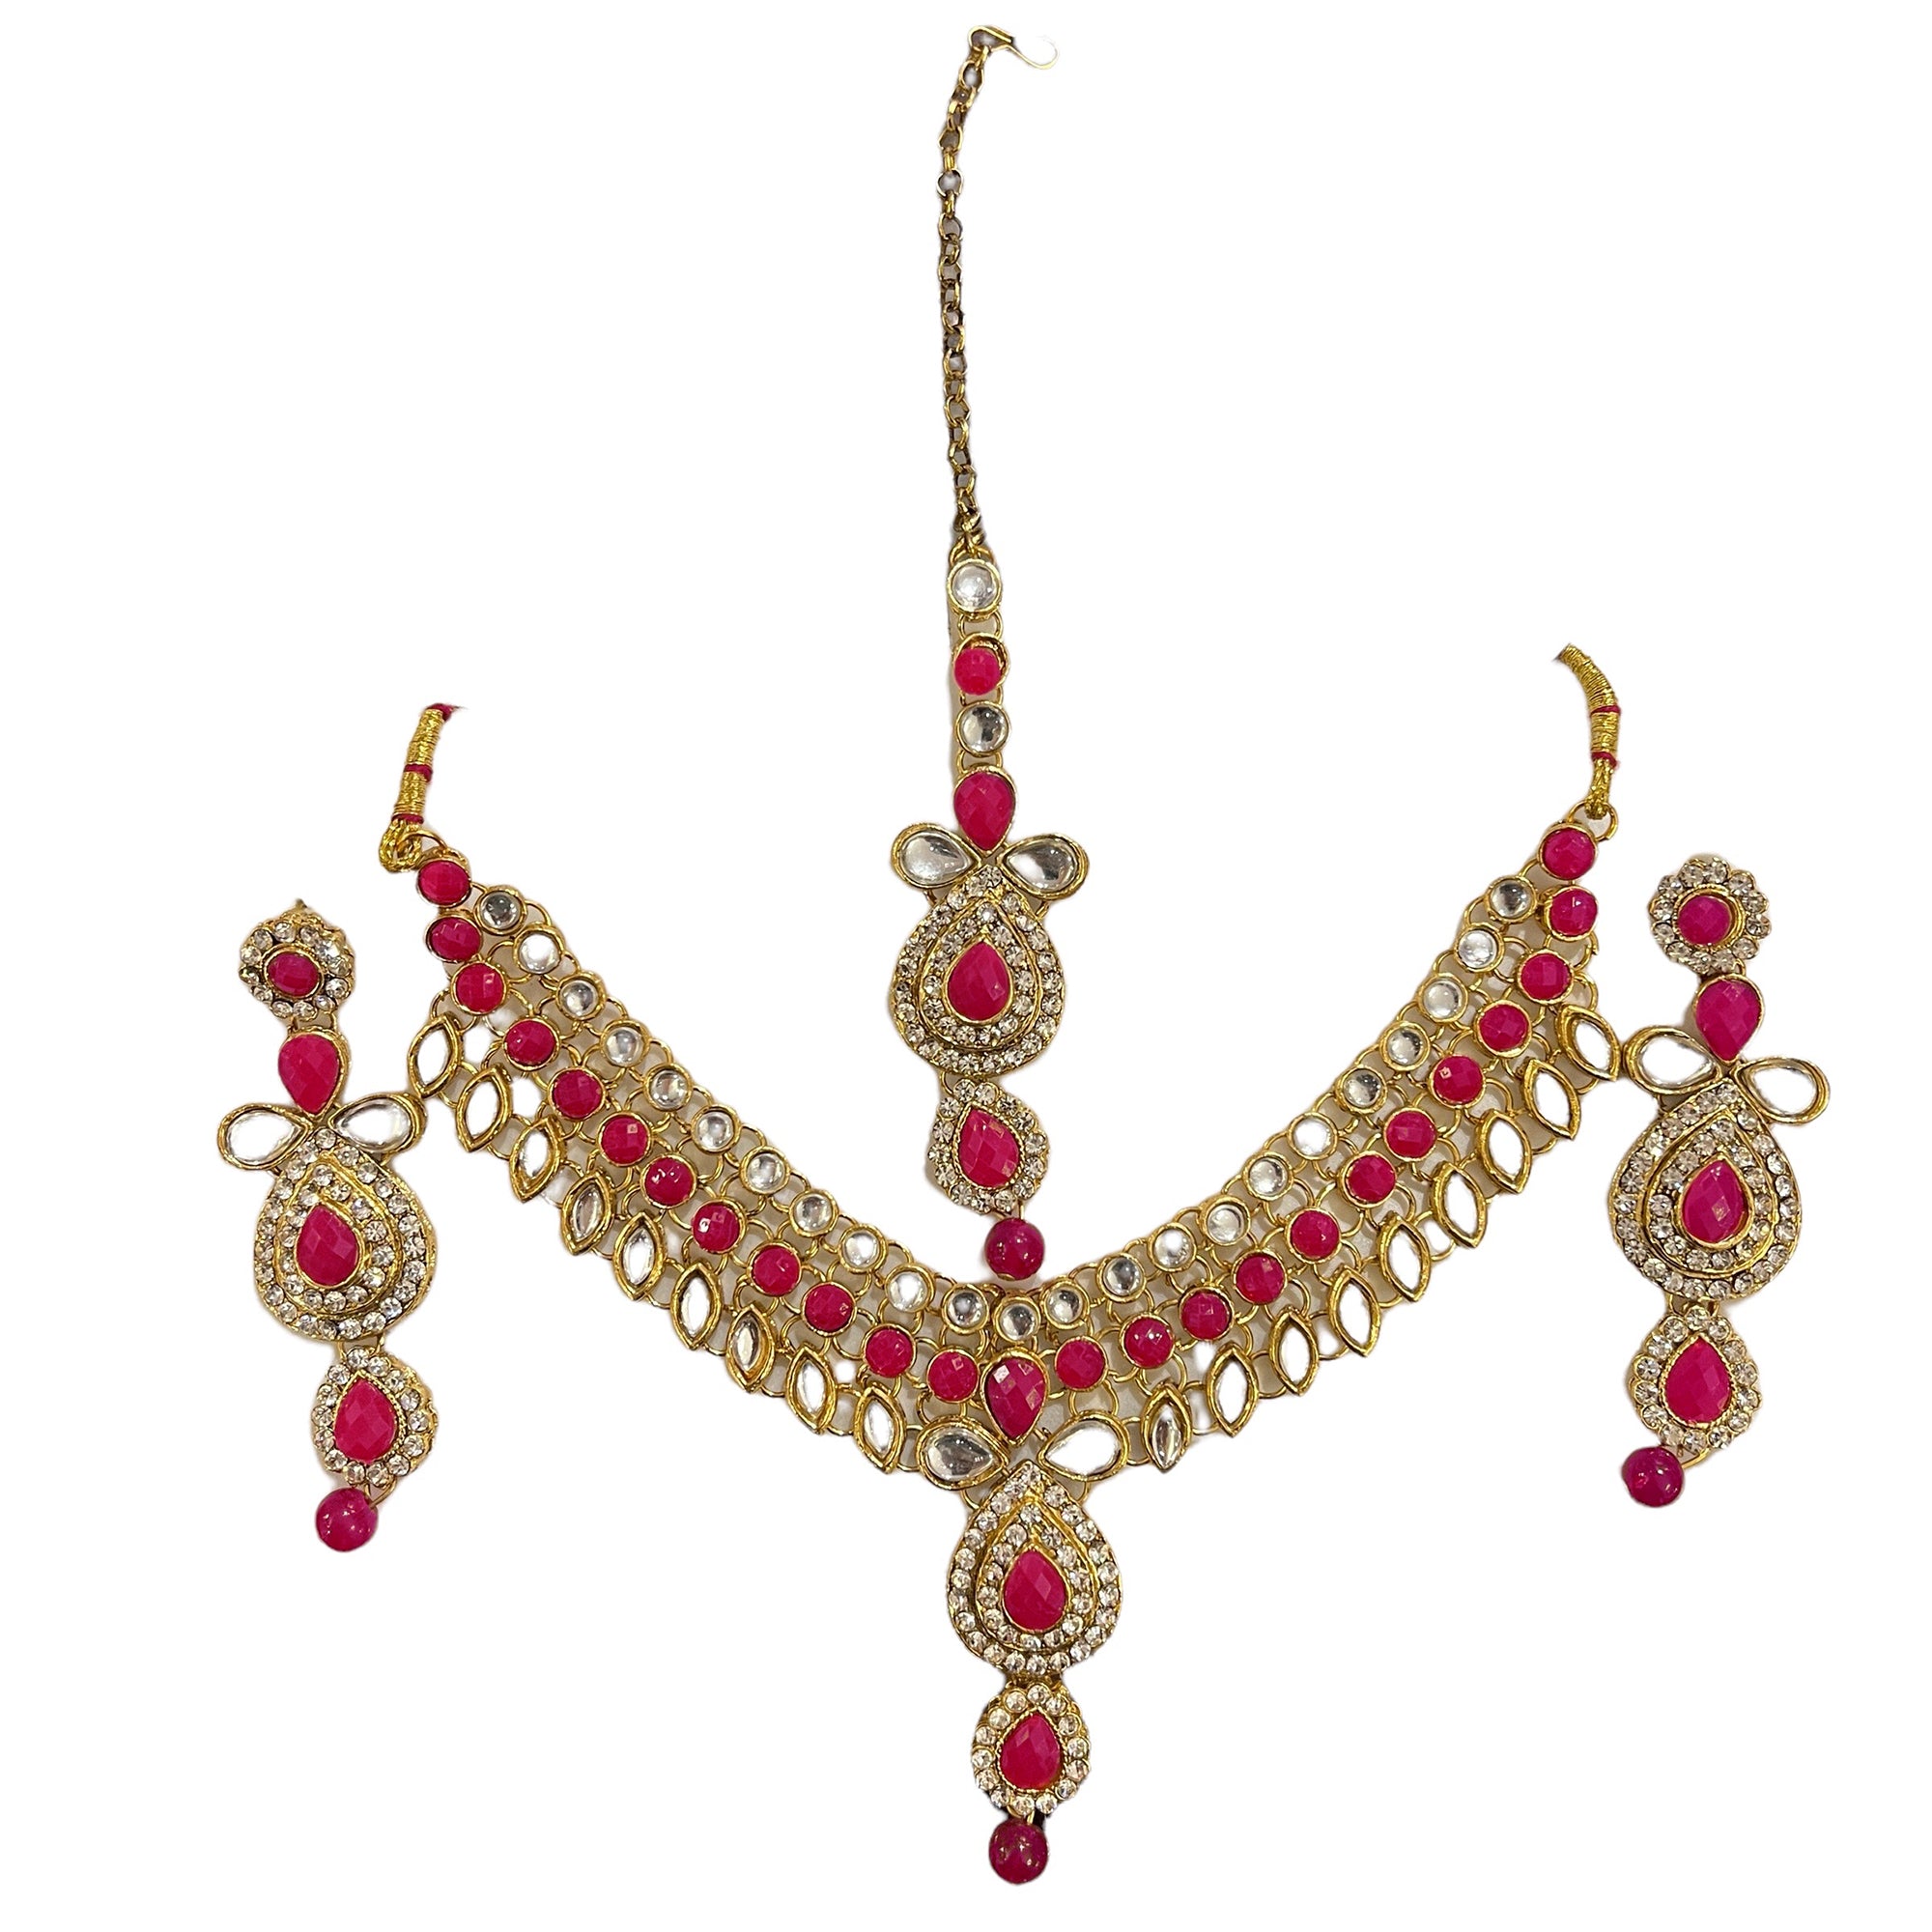 DT Pink & Gold Necklace Sets-3 Styles - Vintage India NYC